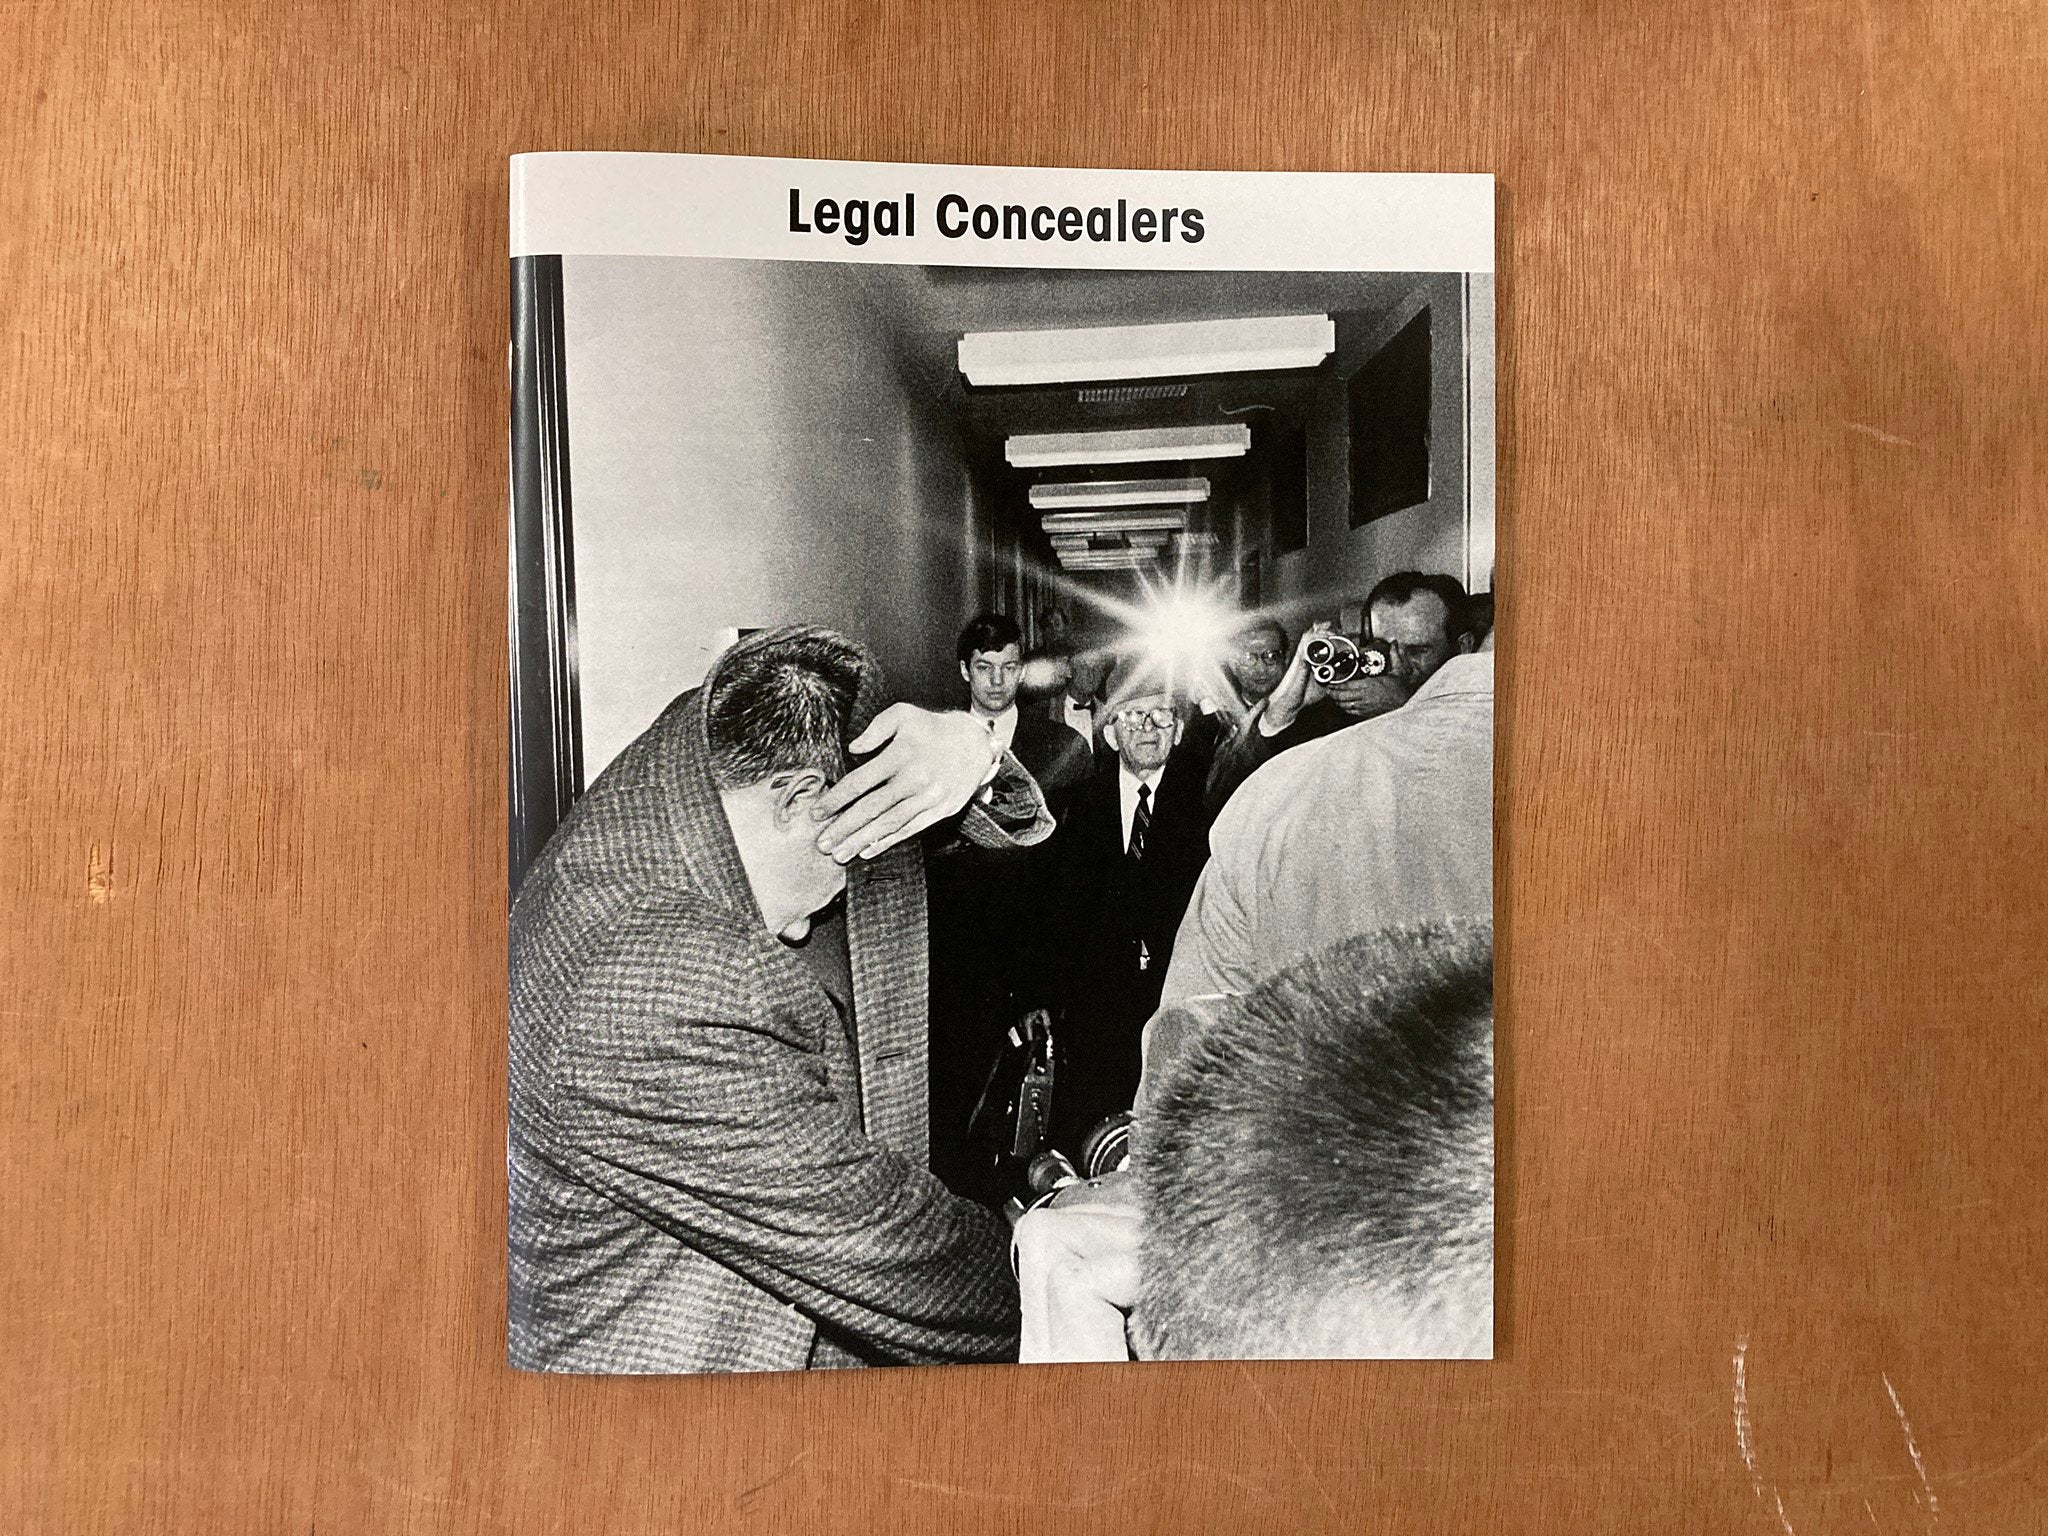 LEGAL CONCEALERS by Marc Fischer and Public Collectors